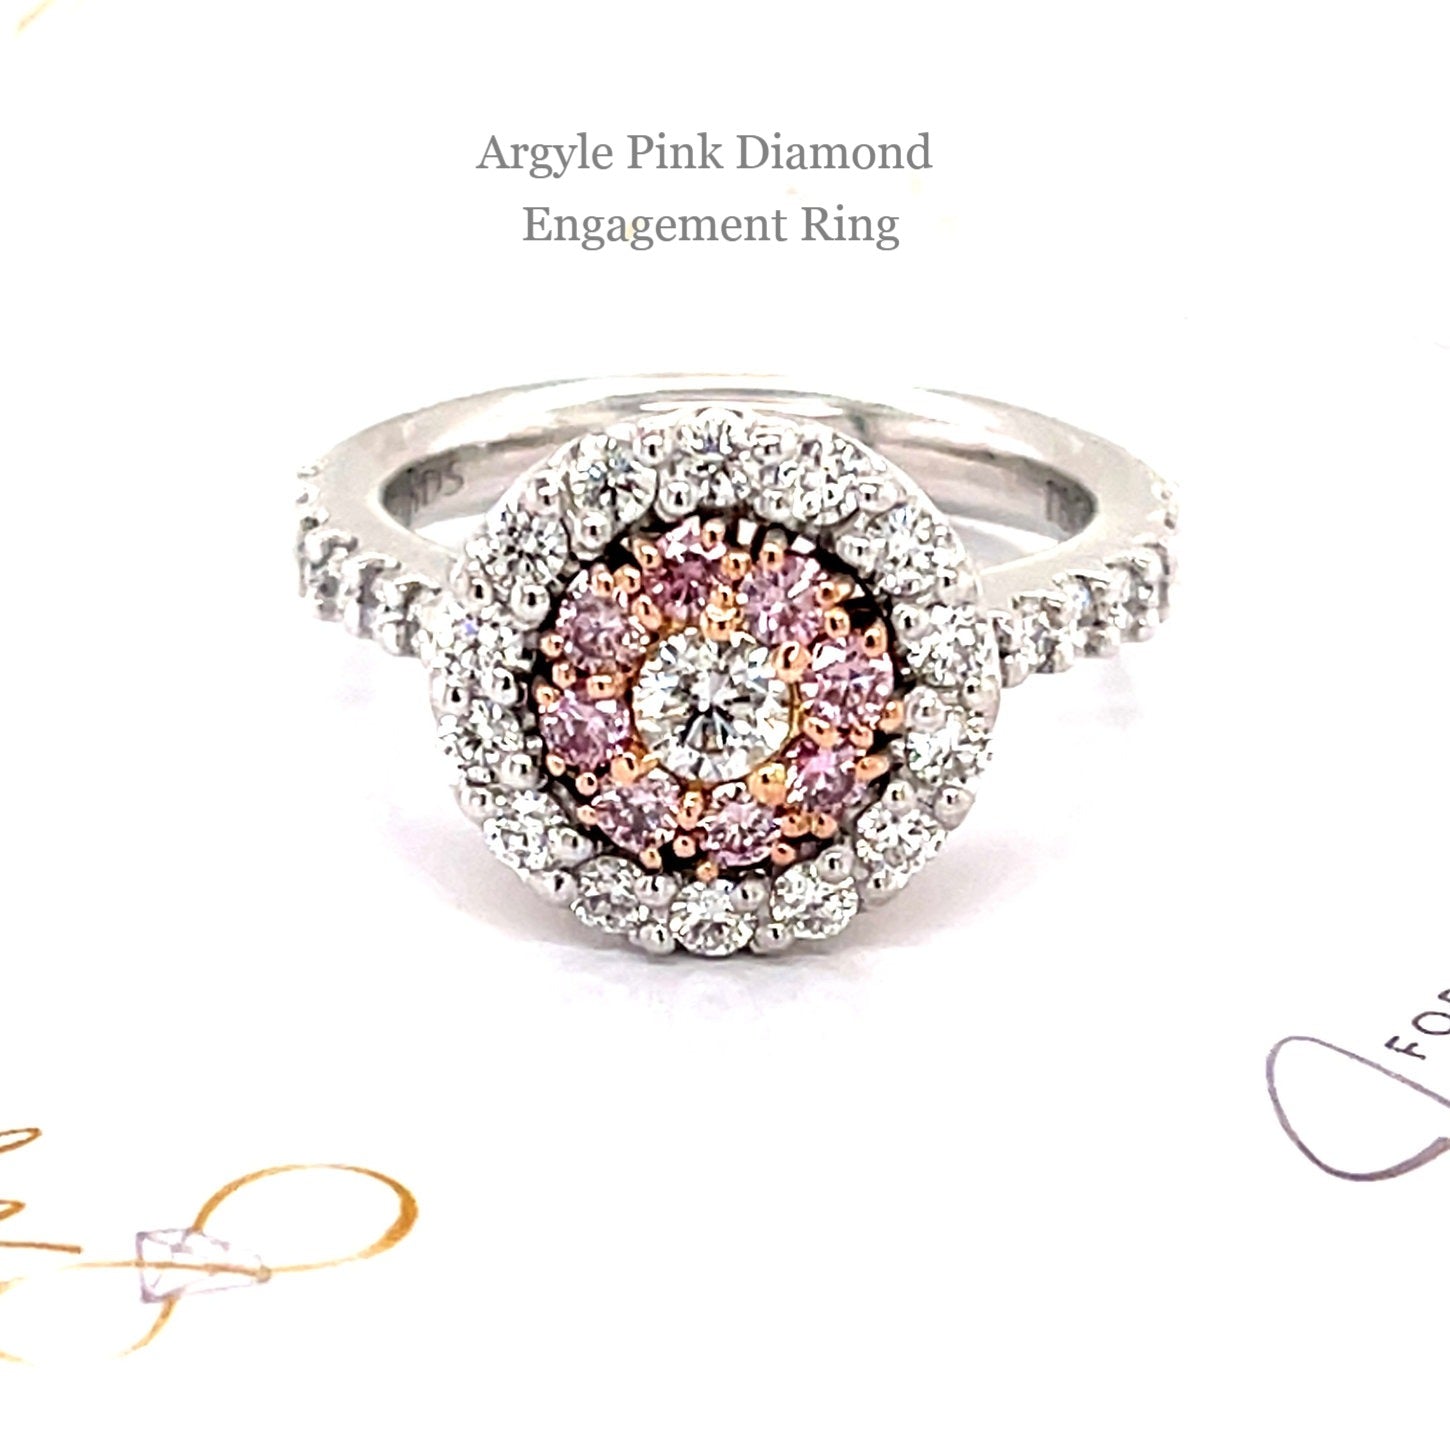 The Allure of the Rare Pink Diamond Engagement Ring